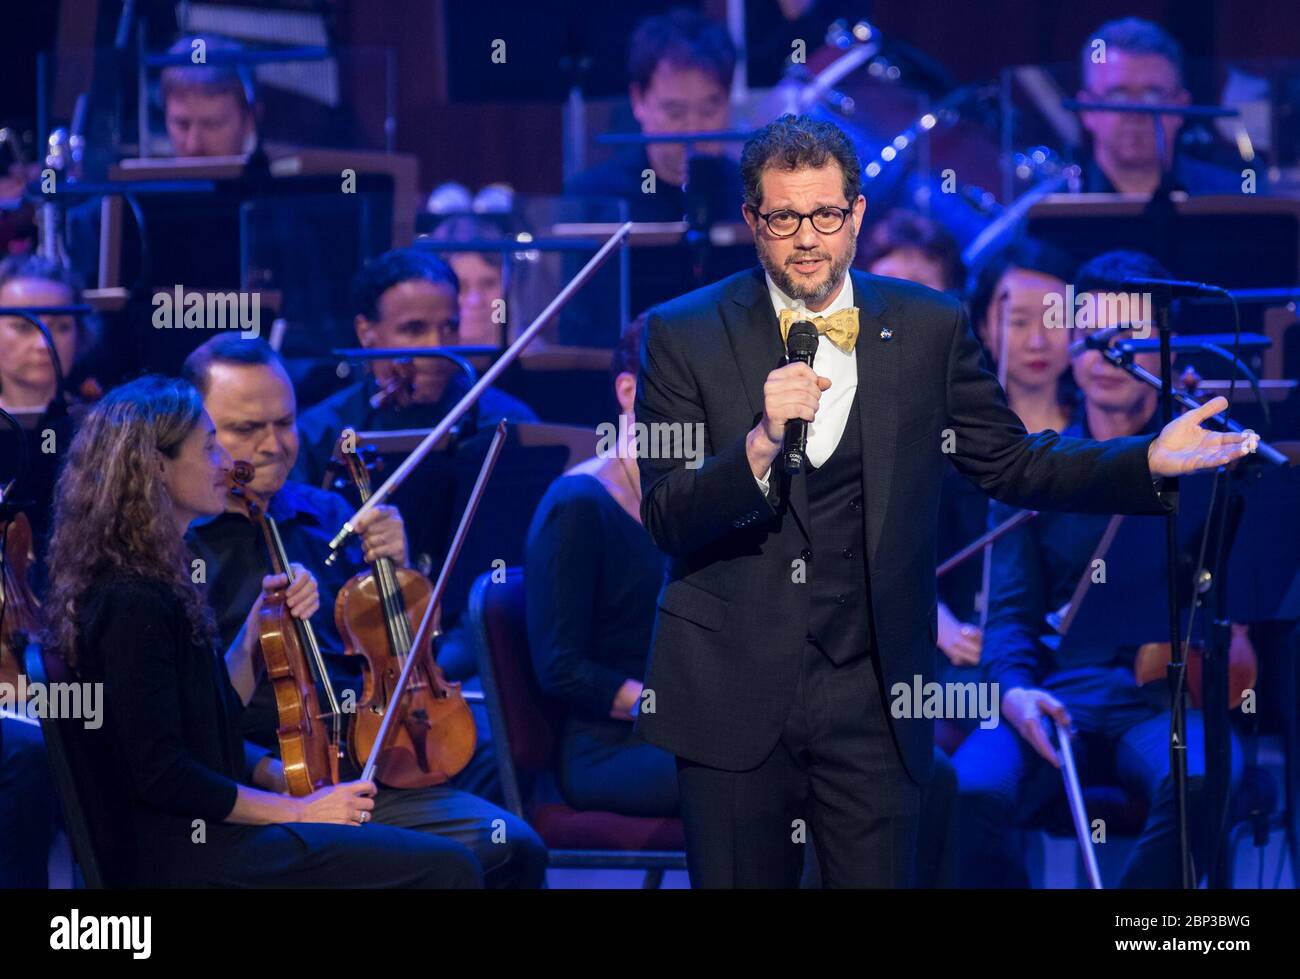 NASA Celebrates 60th Anniversary with National Symphony Orchestra  Composer Michael Giacchino speaks during the &quot;National Symphony Orchestra Pops: Space, the Next Frontier&quot; event celebrating NASA's 60th Anniversary, Friday, June 1, 2018 at the John F. Kennedy Center for the Performing Arts in Washington. The event featured music inspired by space including artists Will.i.am, Grace Potter, Coheed &amp; Cambria, John Cho, and guest Nick Sagan, son of Carl Sagan. Stock Photo